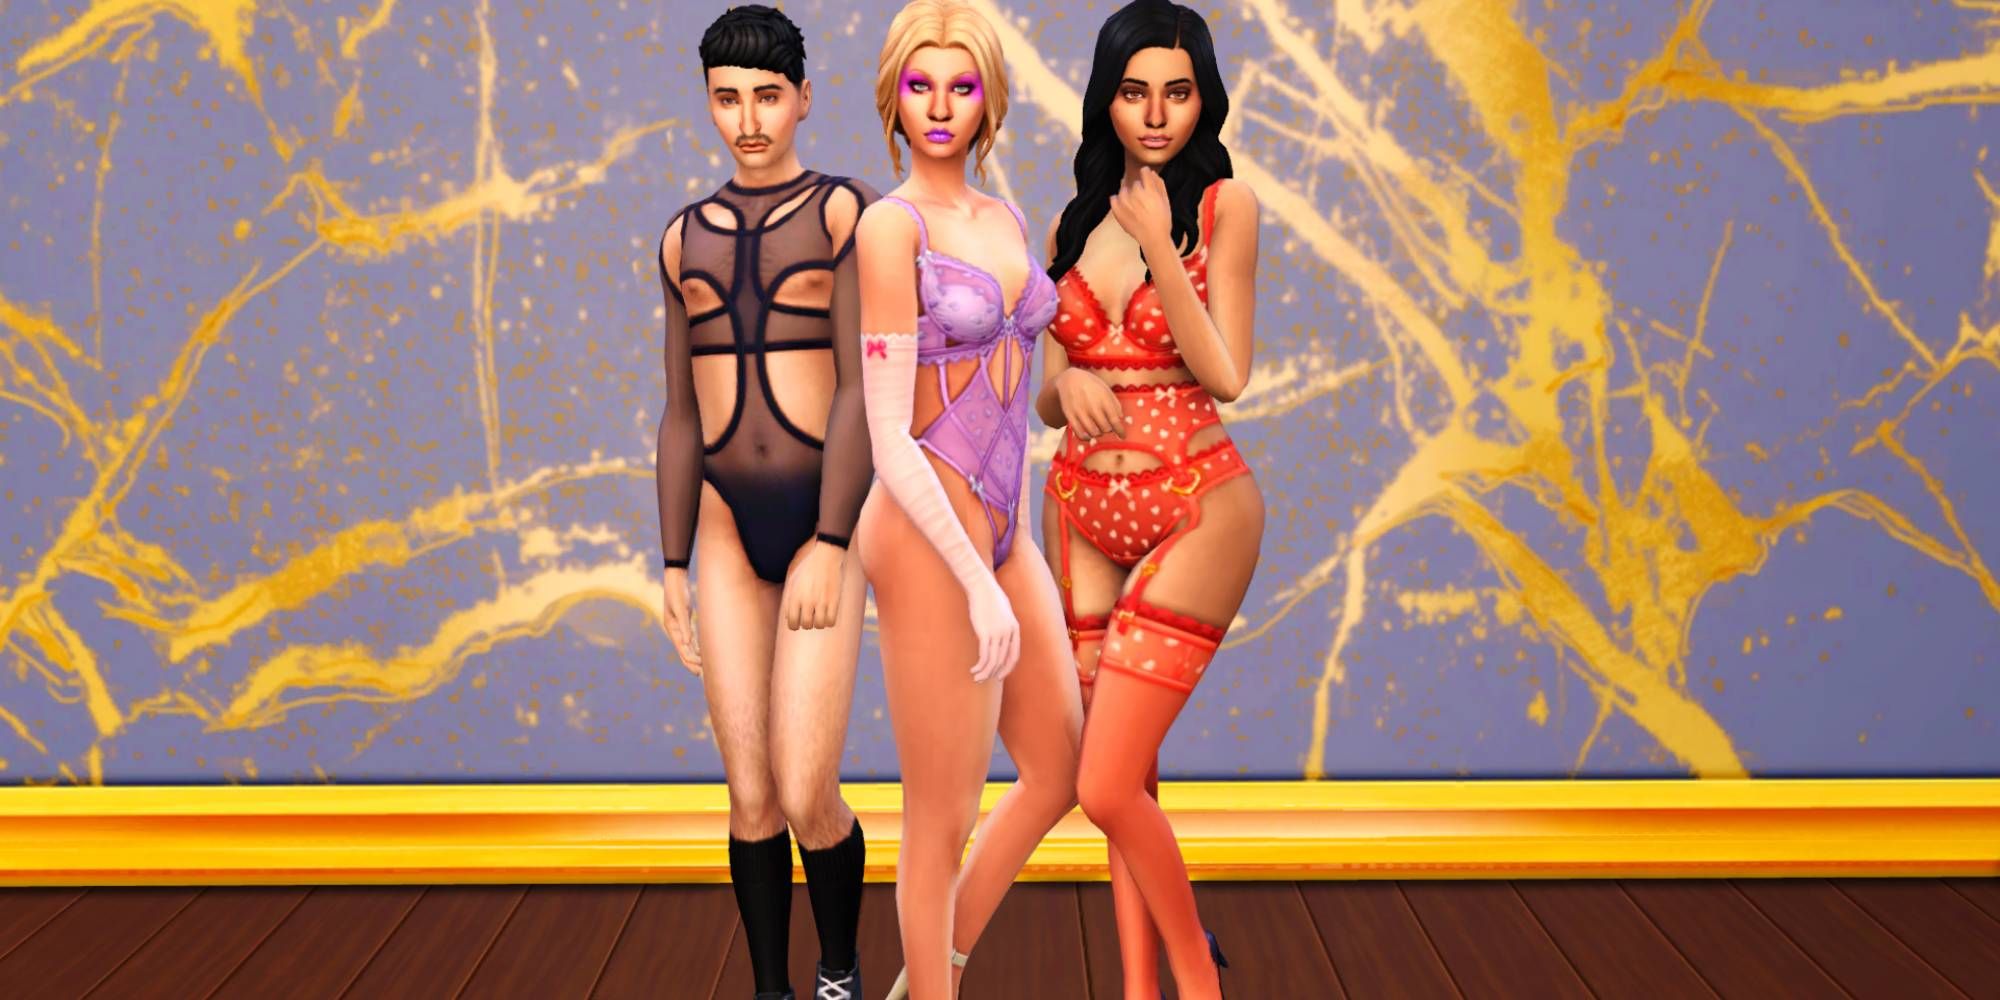 Three Sims wearing items from the CC set in black, purple, and red